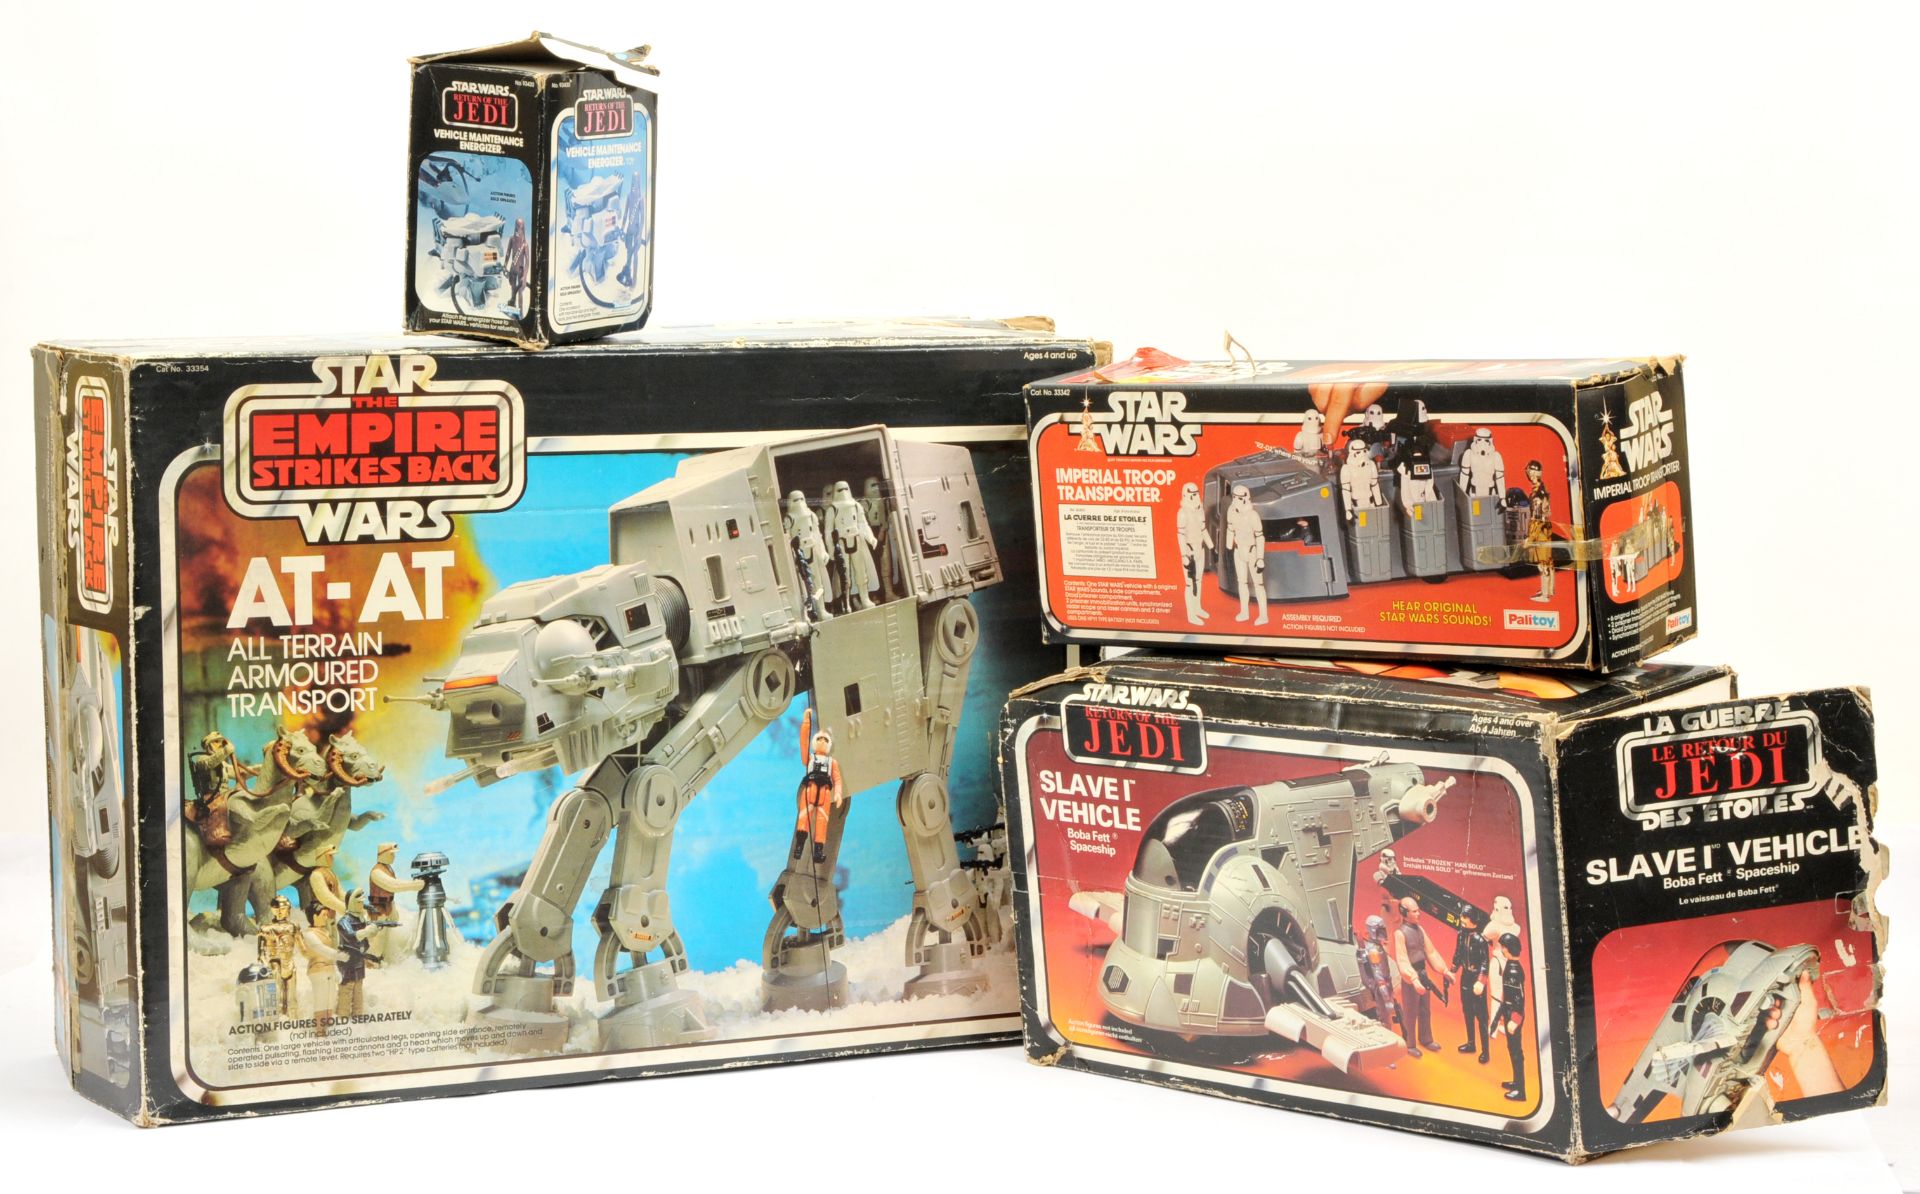 Palitoy & Kenner Star Wars vintage vehicles x 4 - Image 2 of 3